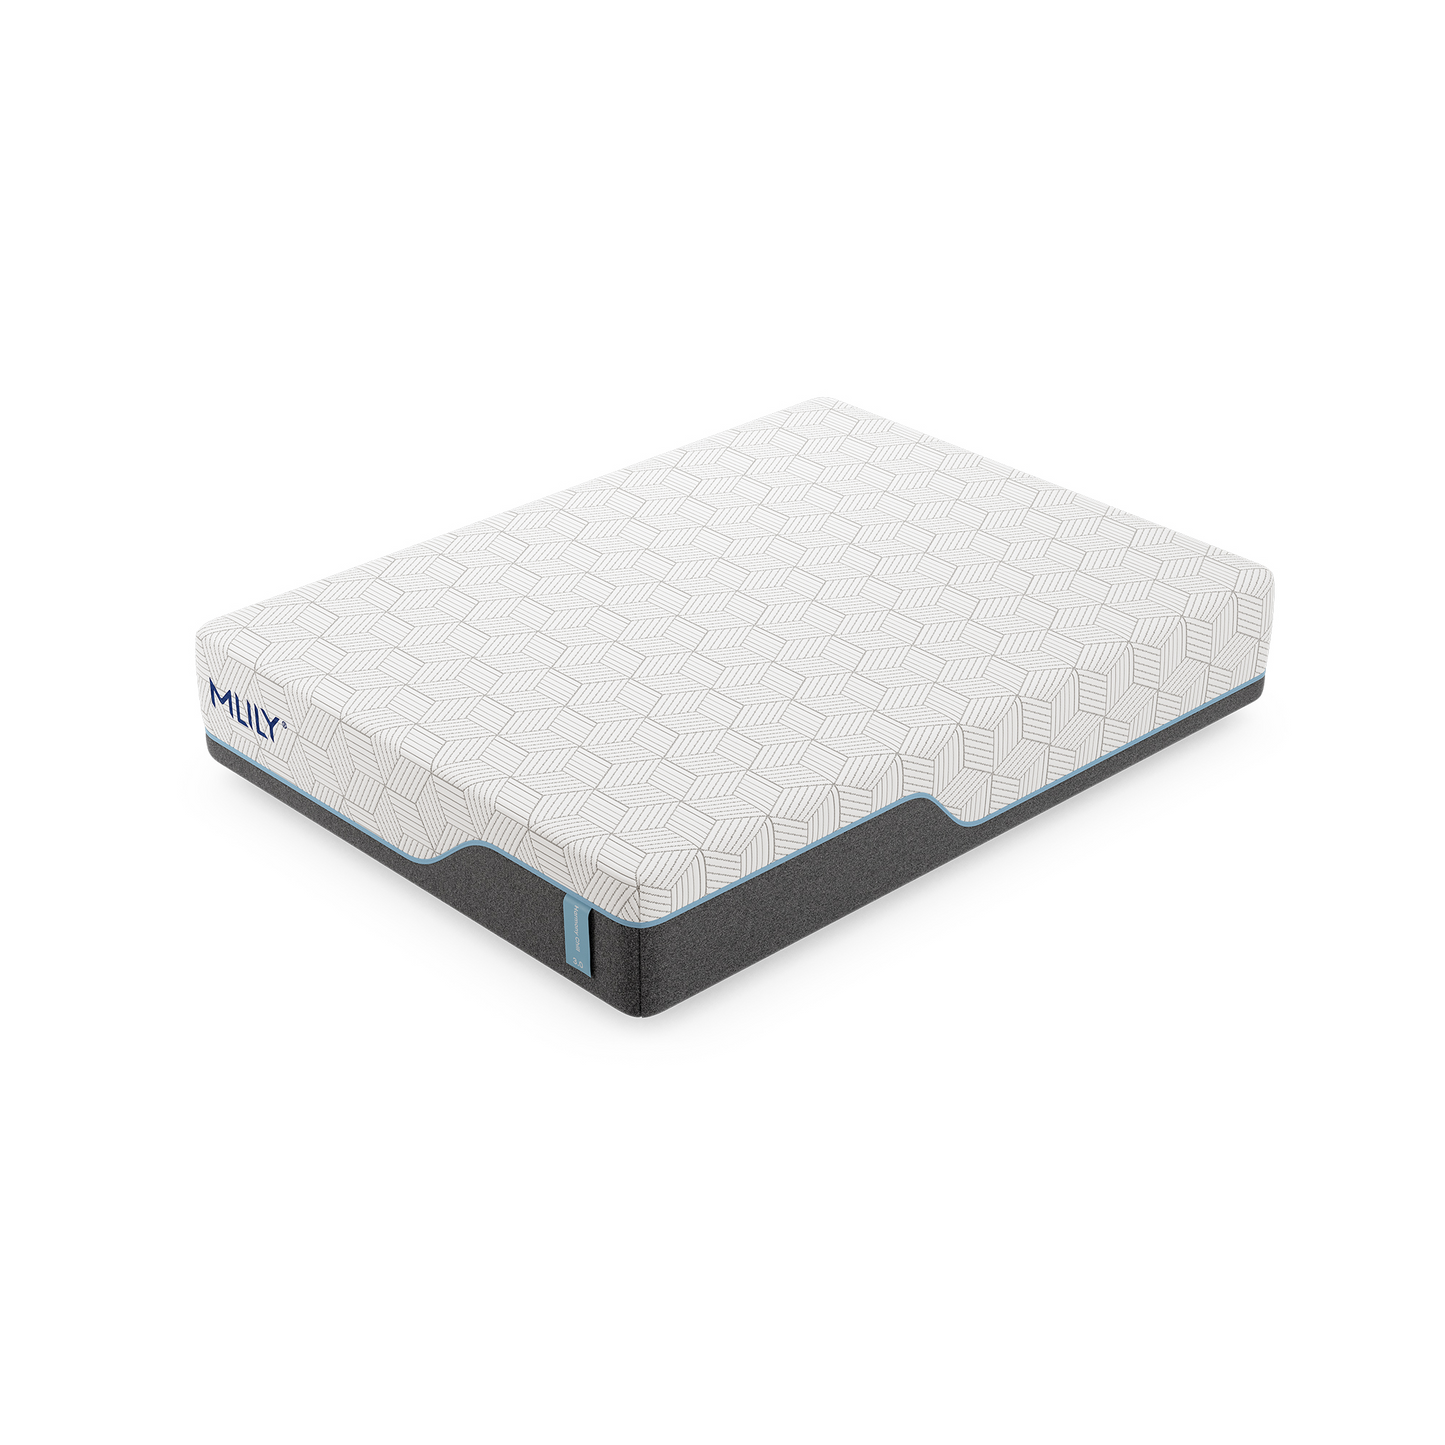 Harmony Chill 3.0 13" Memory Foam Mattress With Advanced Temperature Regulation, Corner View, Right Side, Zoomed Out